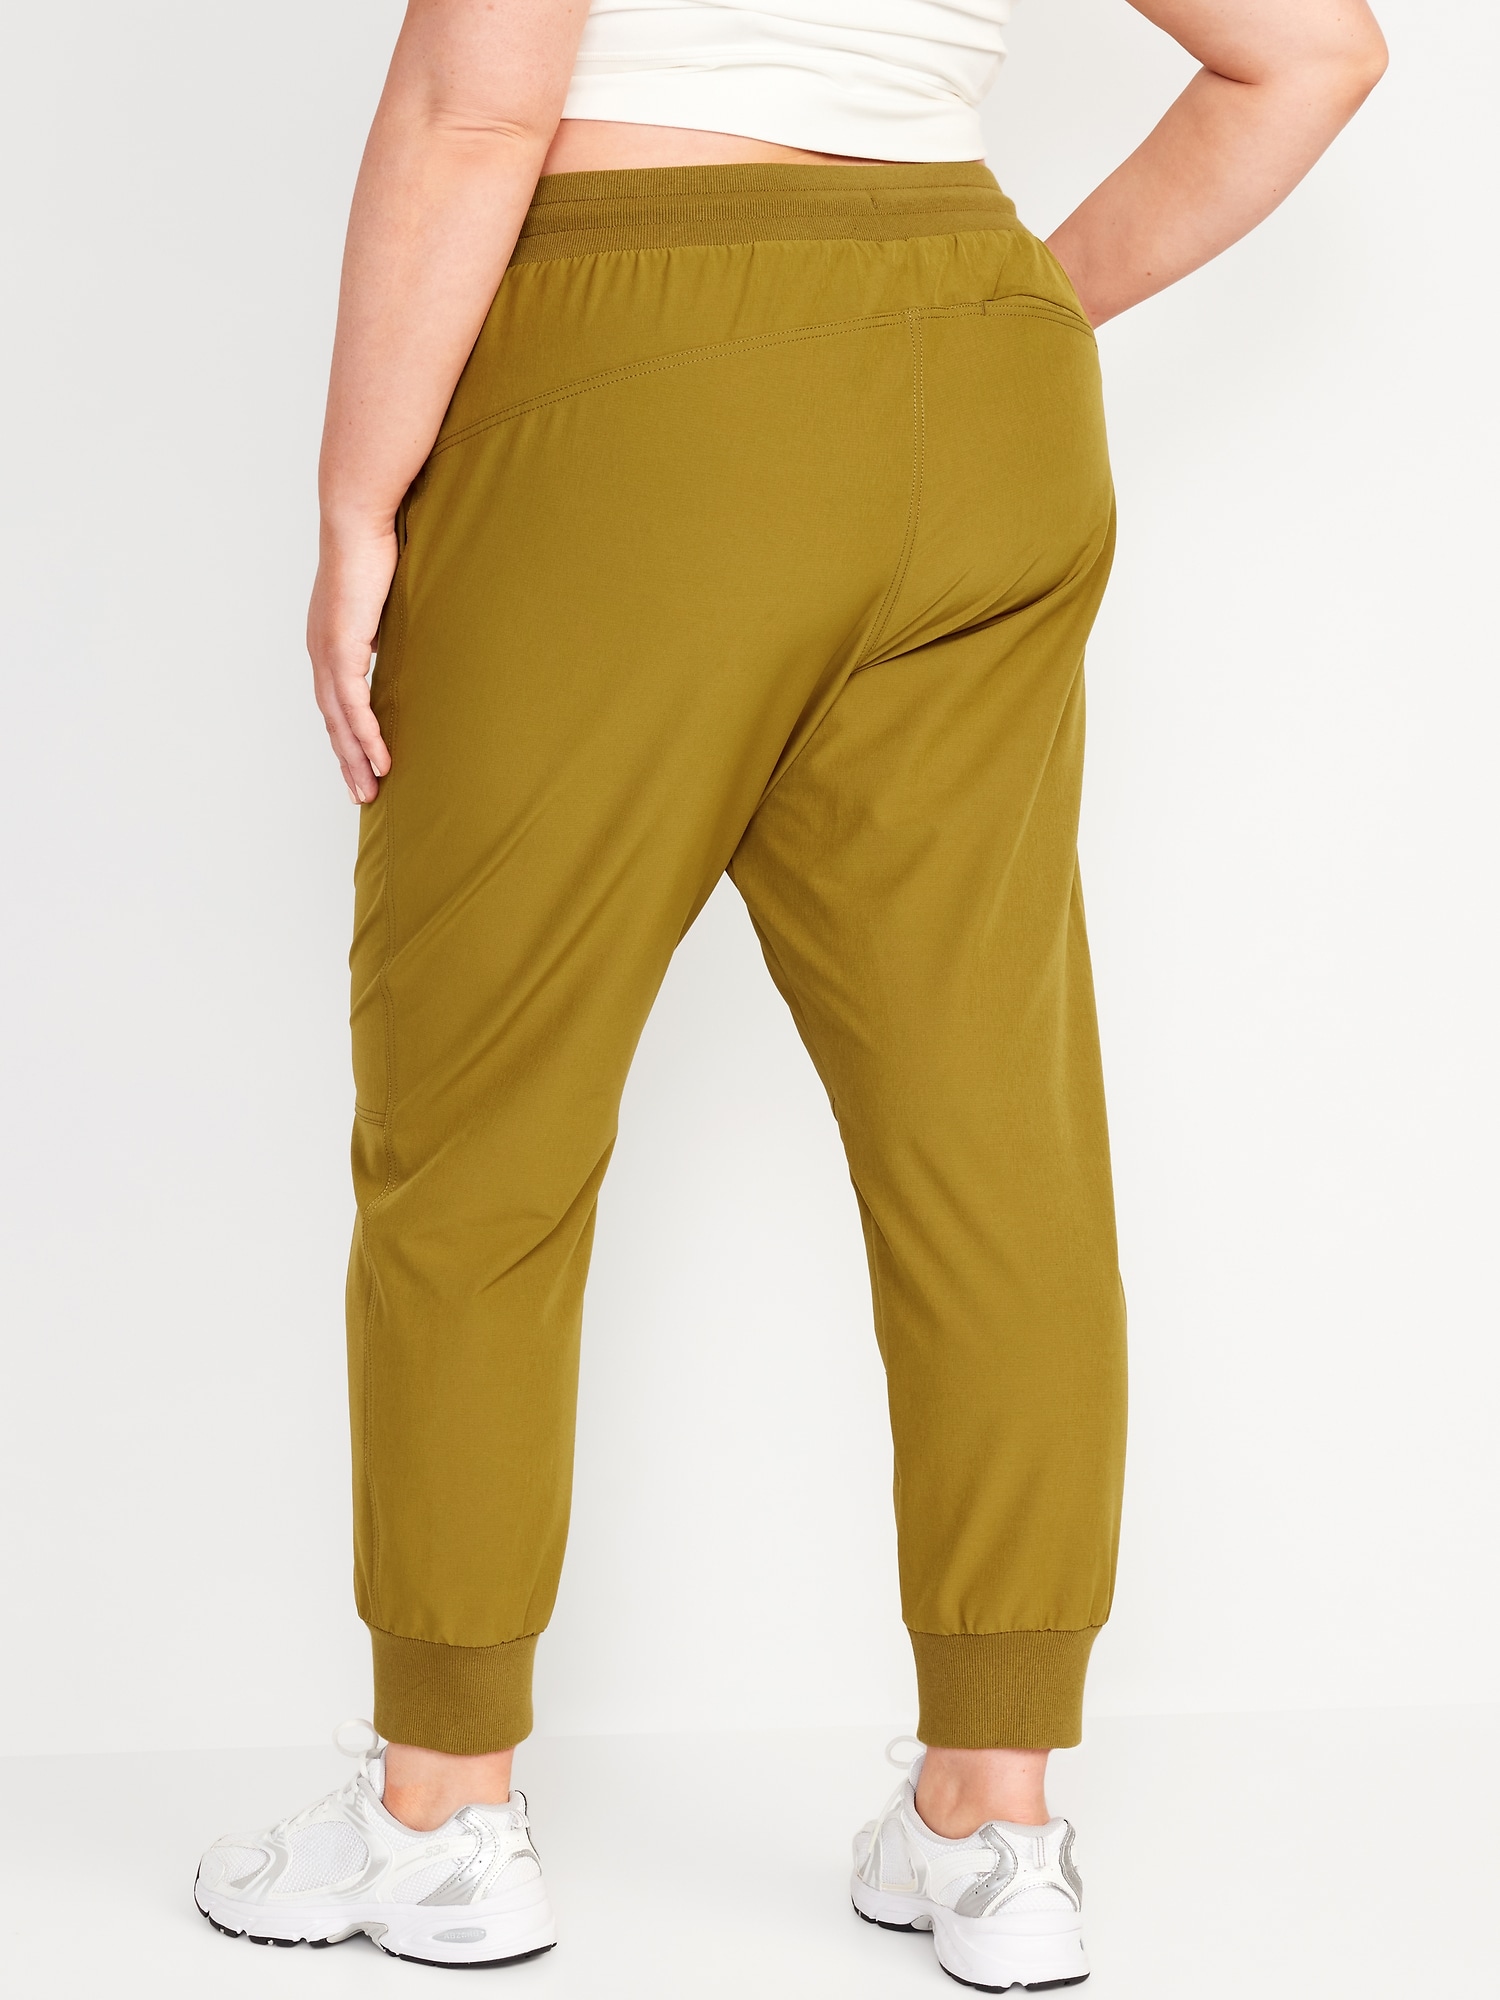 High-Waisted All-Seasons StretchTech Water-Repellent Jogger Pants for Women